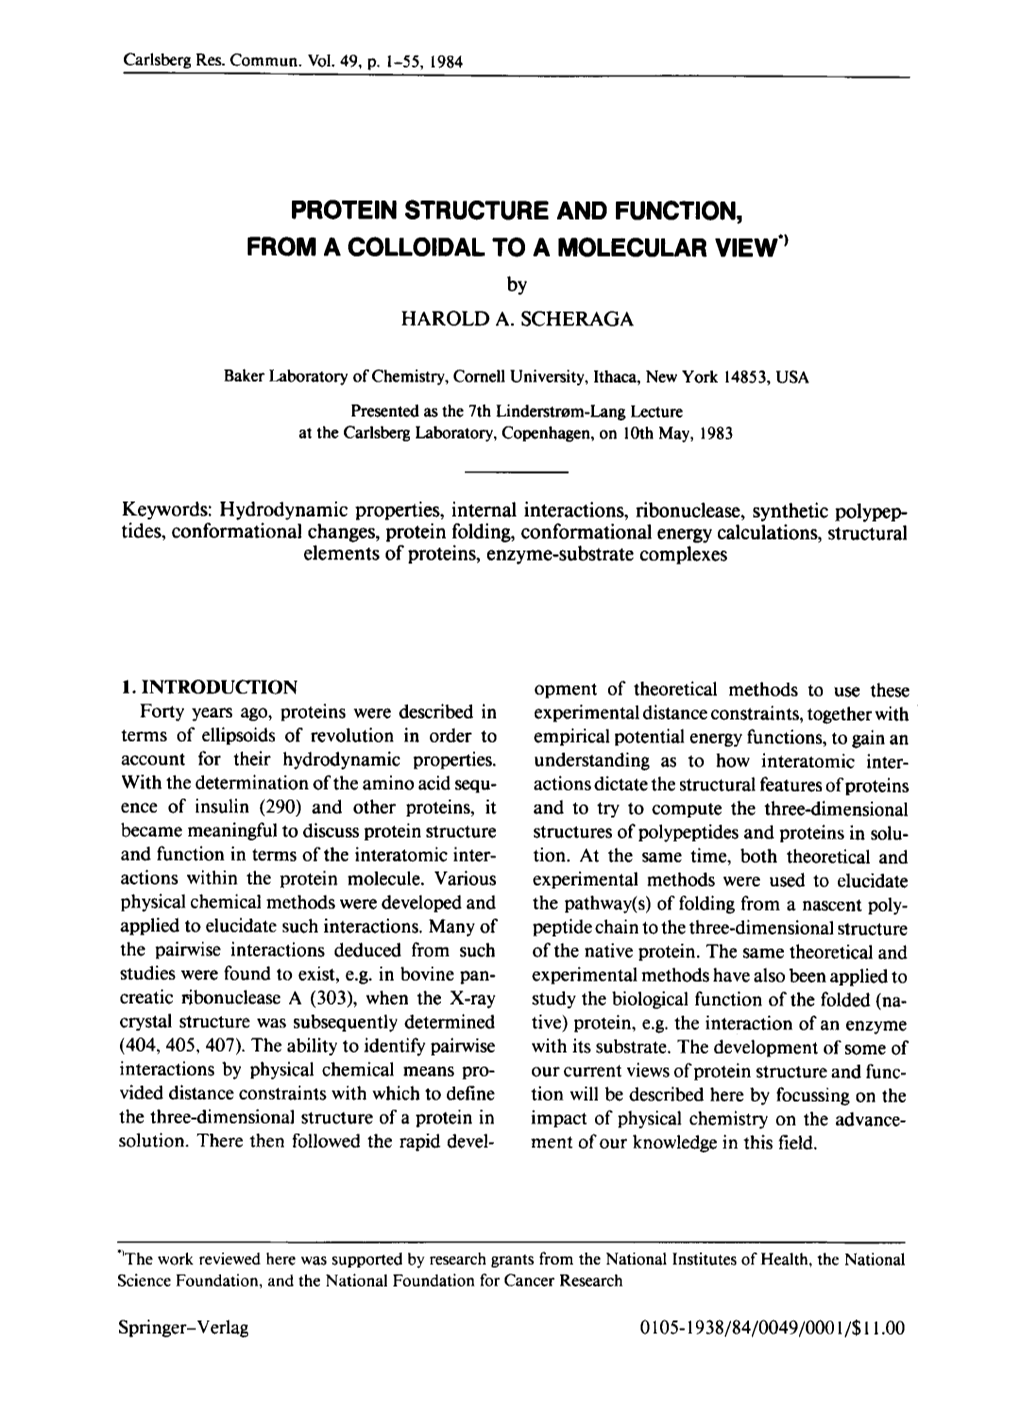 PROTEIN STRUCTURE and FUNCTION, from a COLLOIDAL to a MOLECULAR VIEW" by HAROLD A